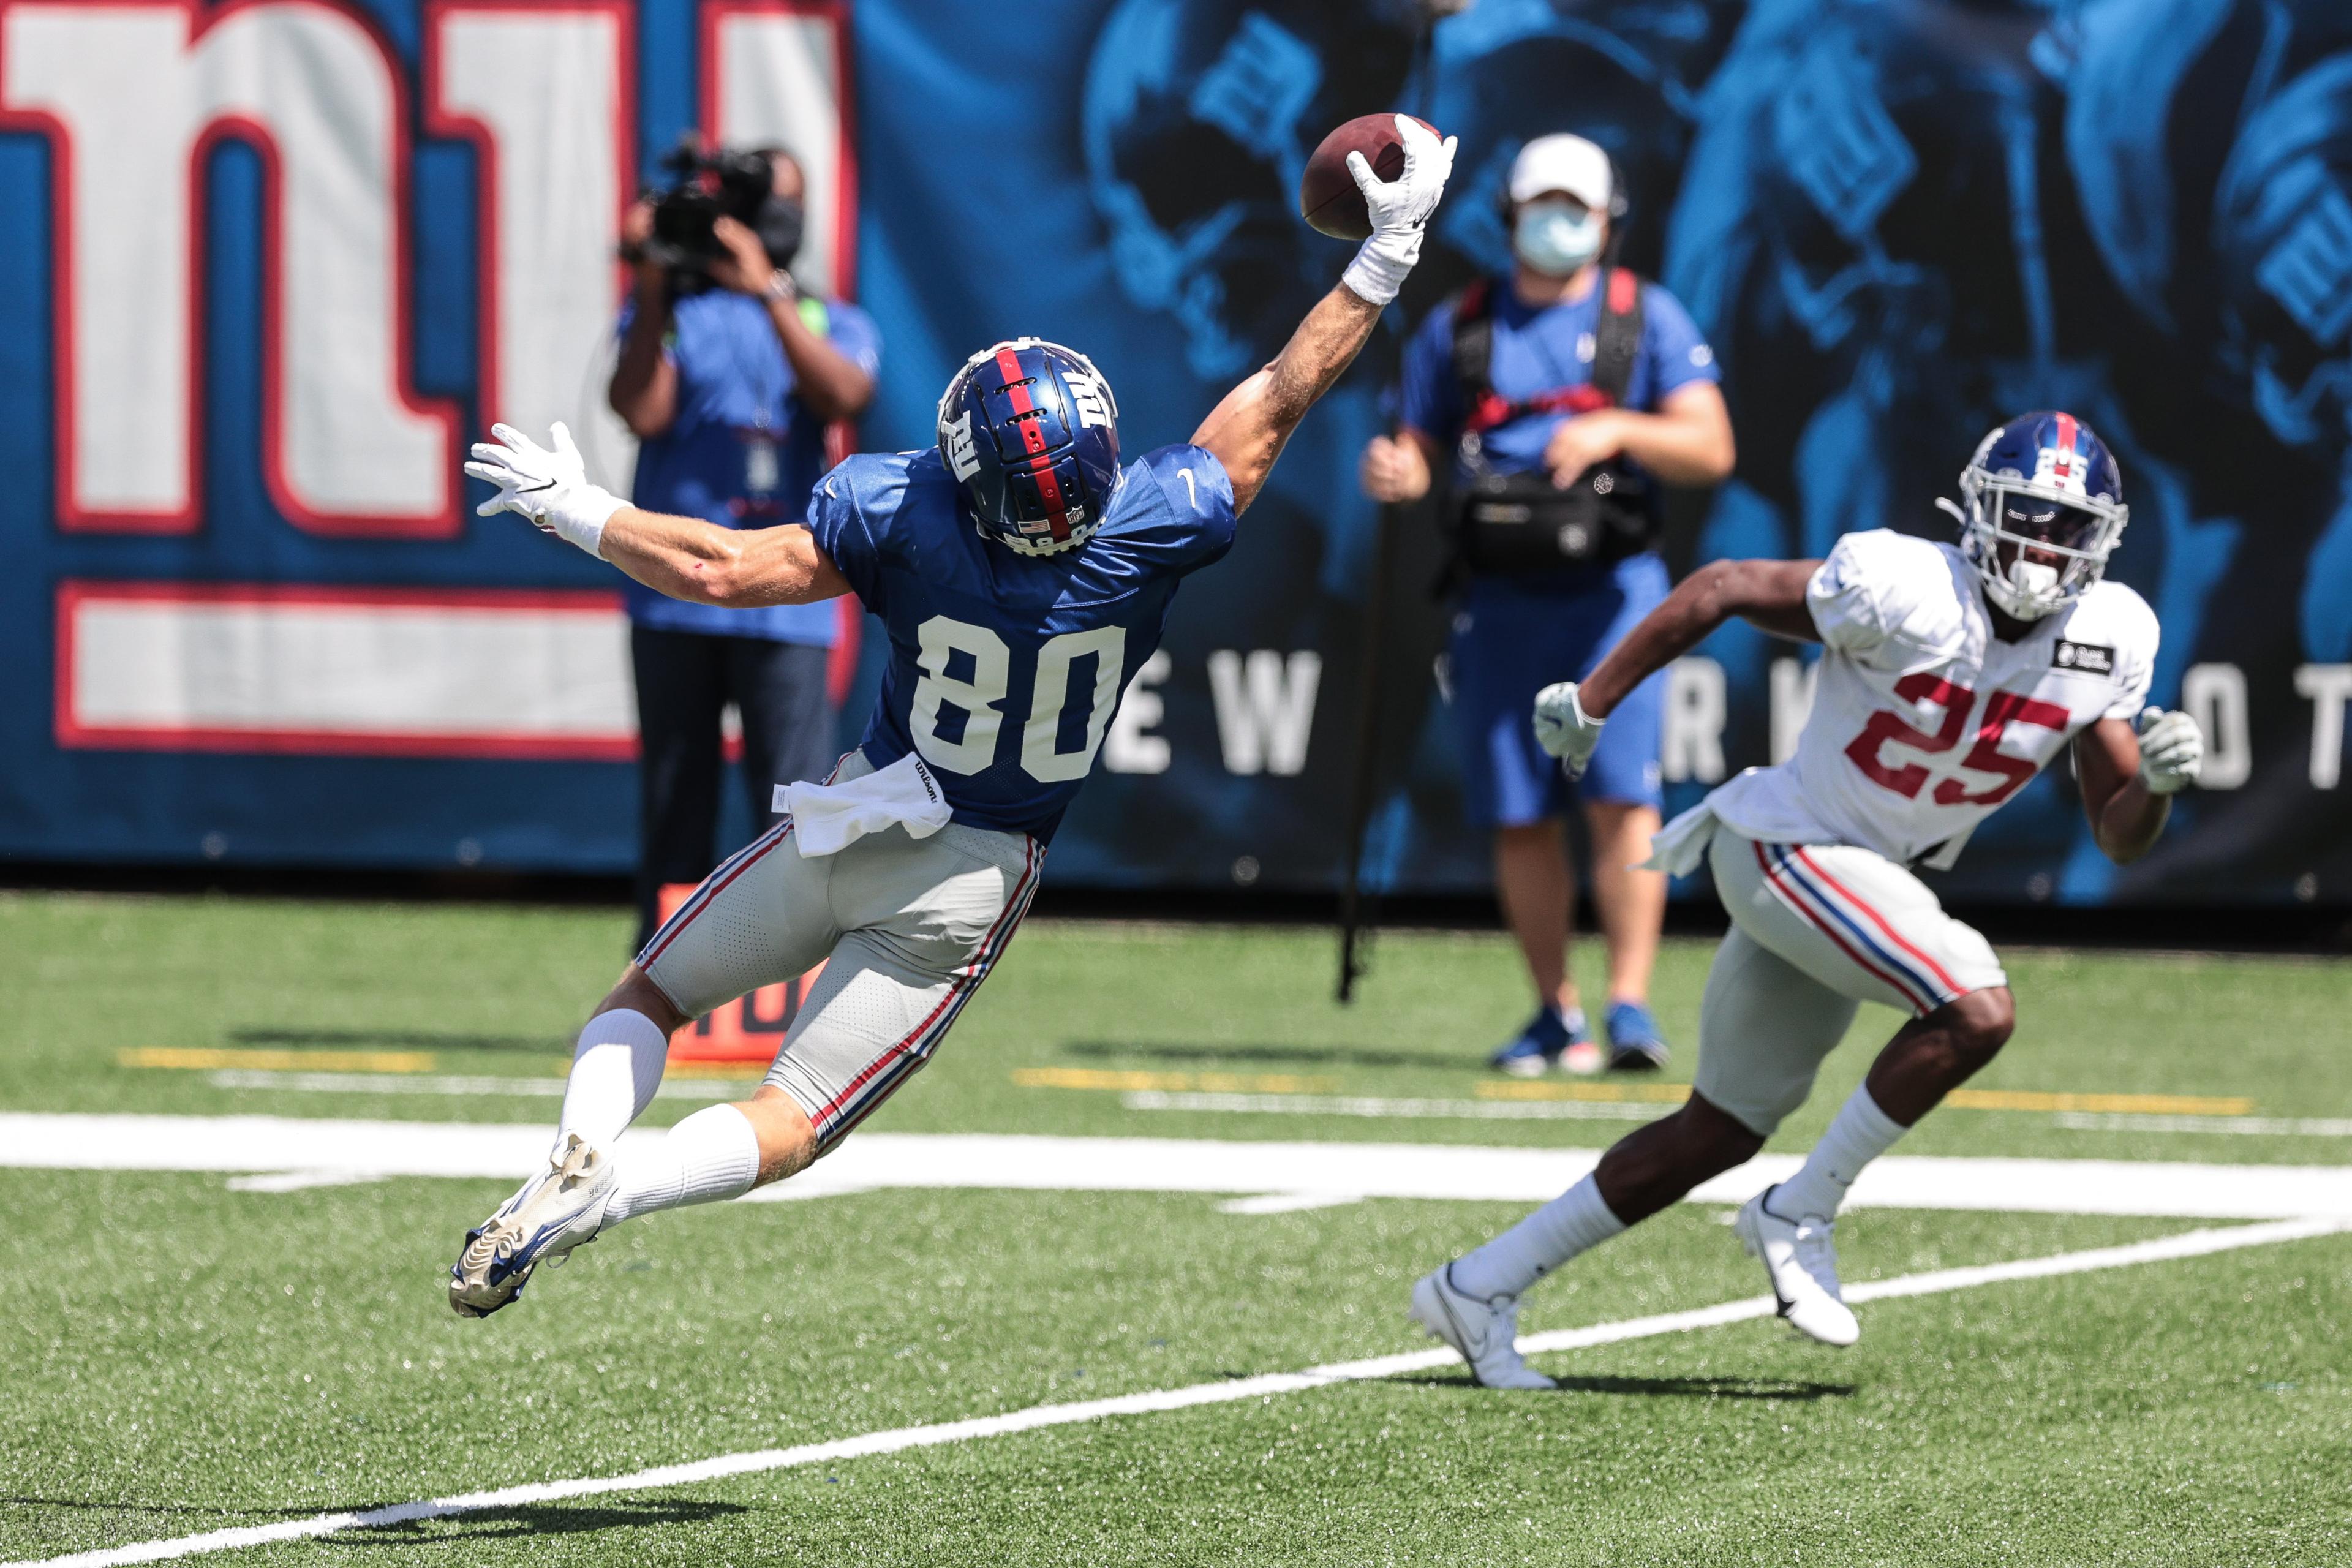 Alex Bachman makes one-handed grab during scrimmage / USA TODAY